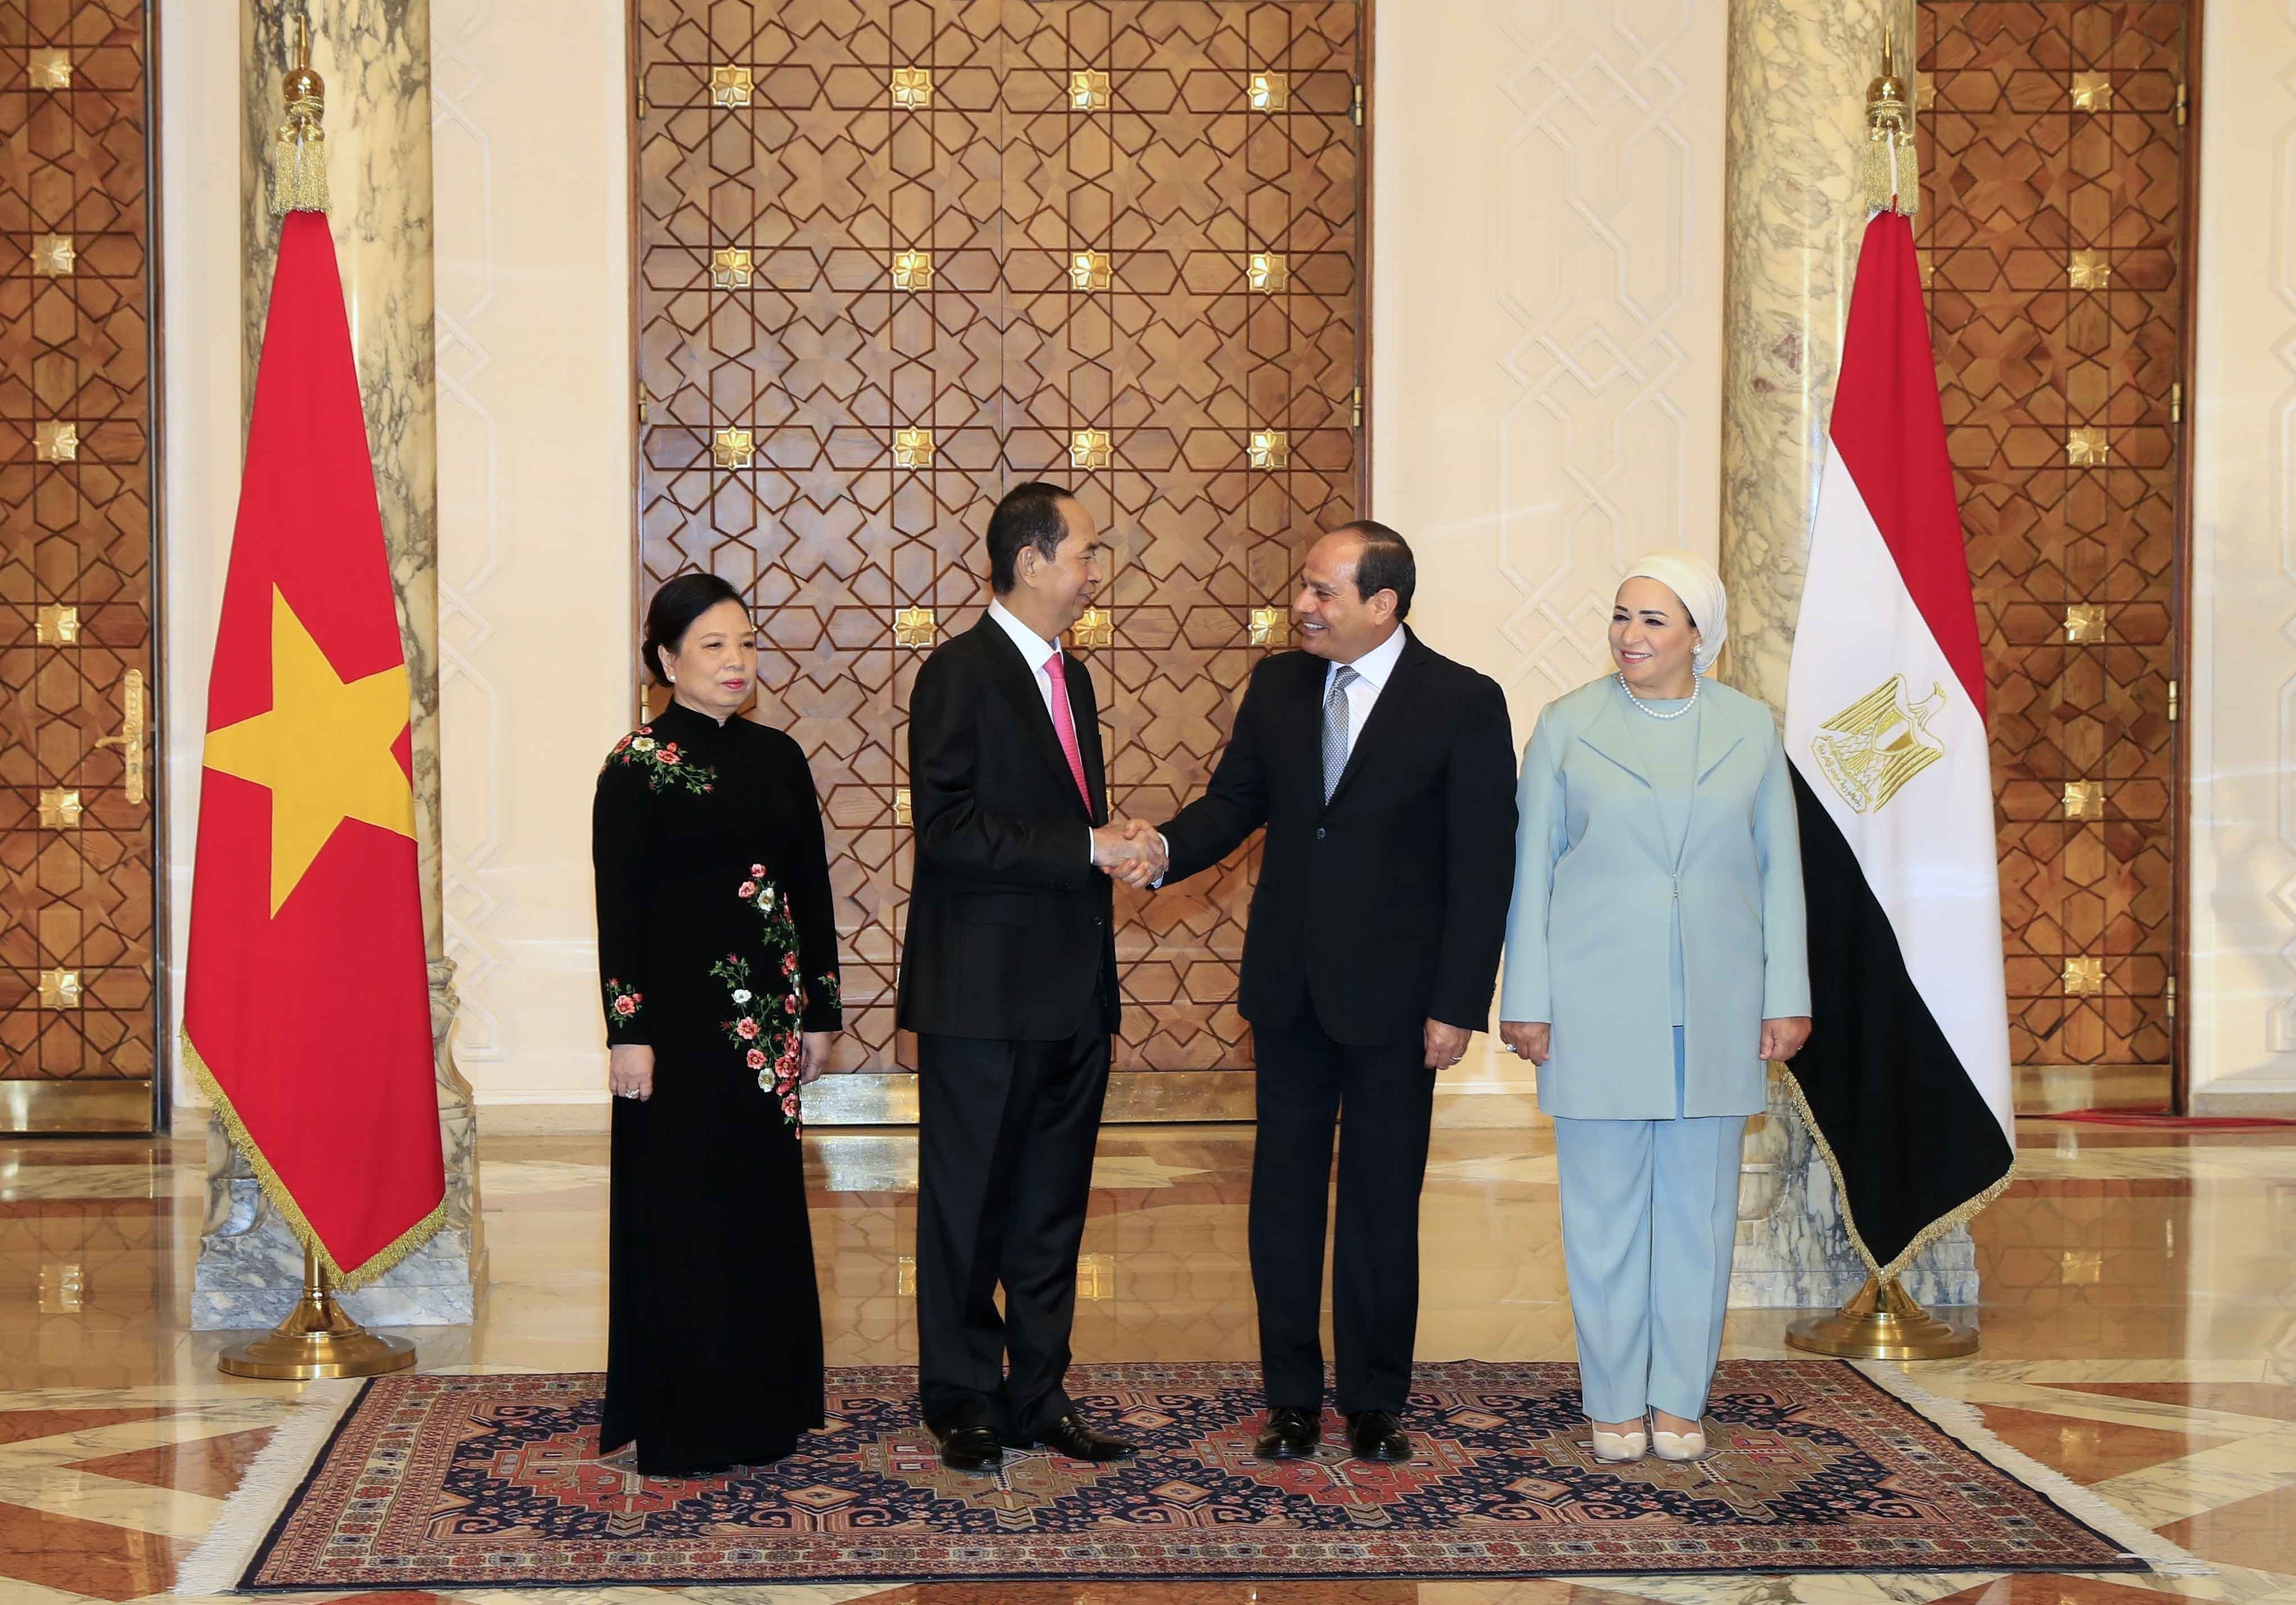 President Tran Dai Quang (L) and his spouse receive warm welcome from Egyptian President Abdel Fattah El-Sisi (R) (Photo: VNA)